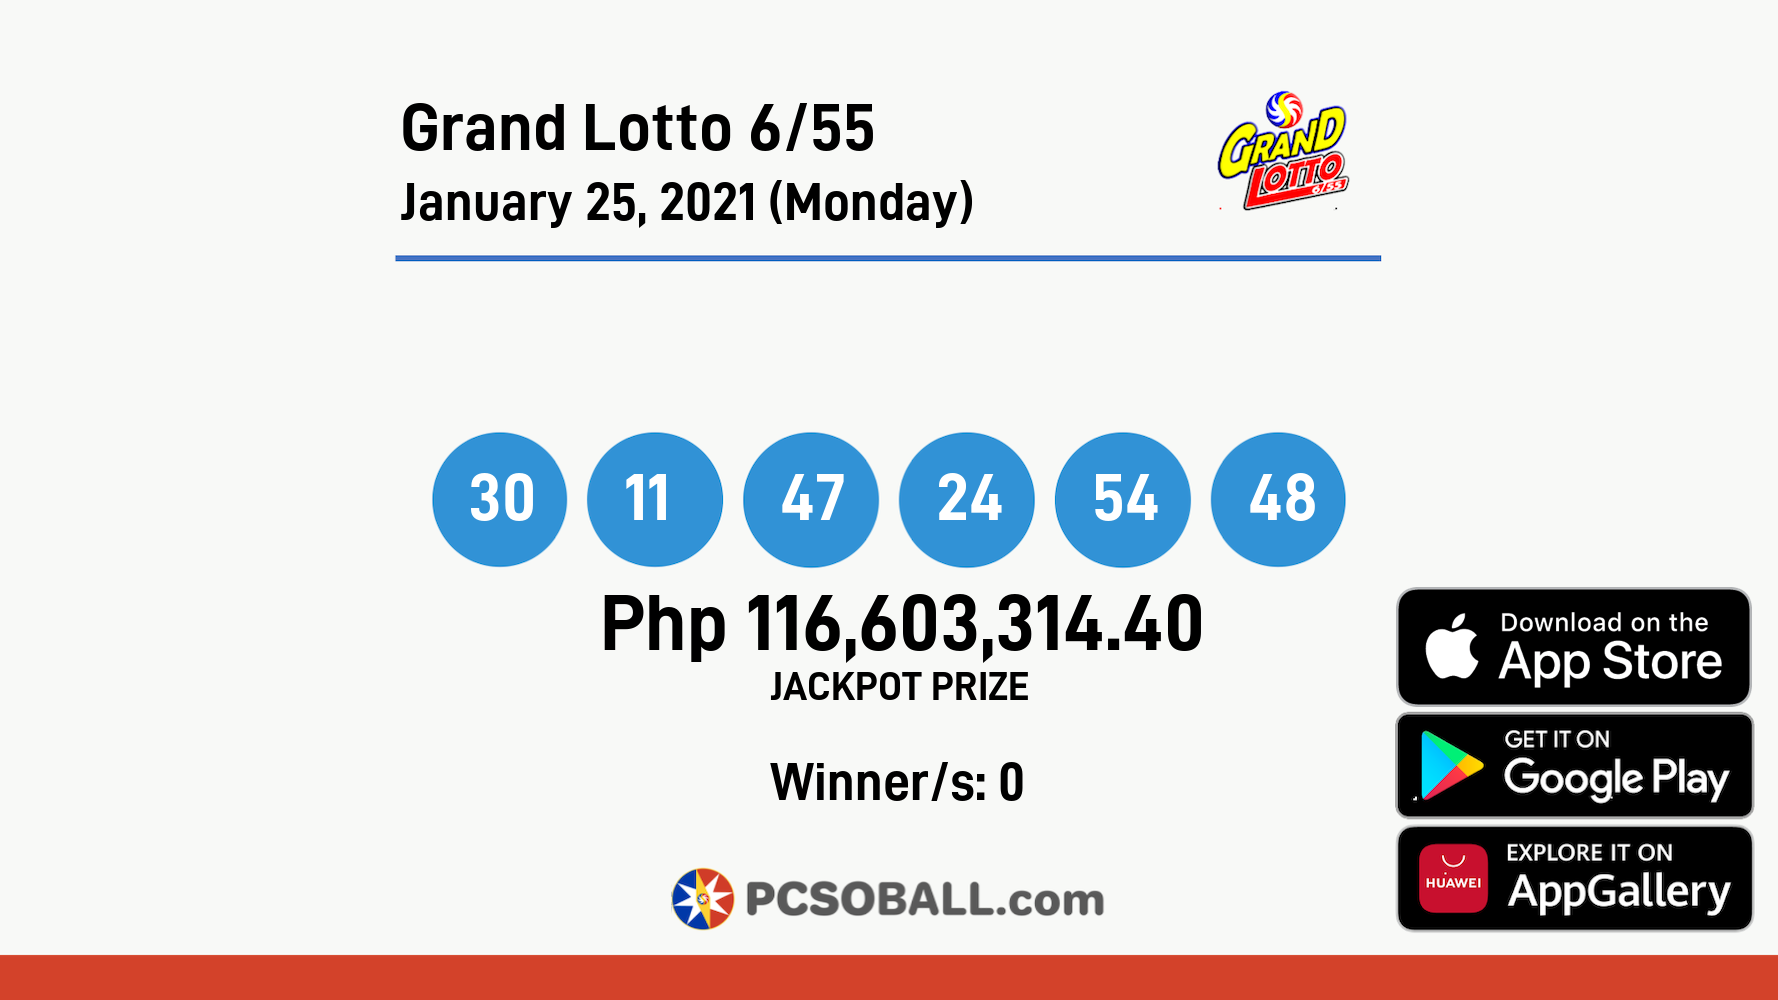 Grand Lotto 6/55 January 25, 2021 (Monday) Result